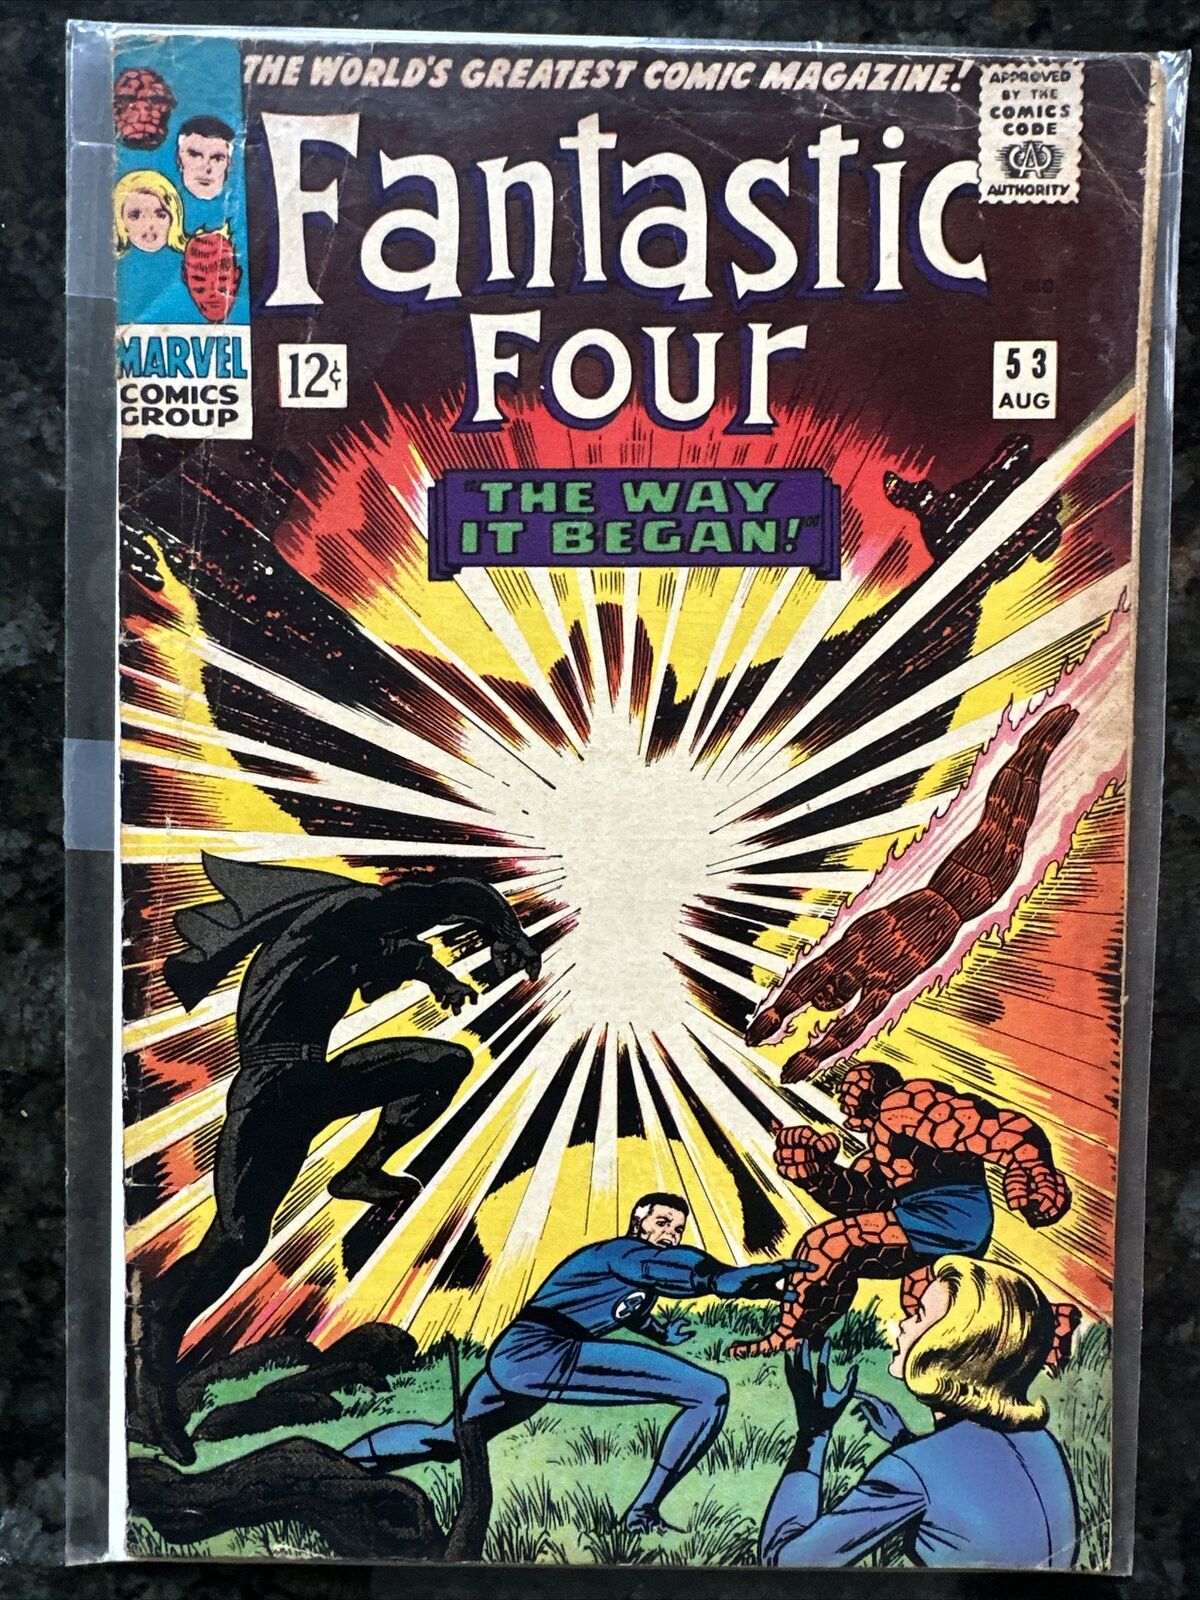 Fantastic Four #53 1966 Key Marvel Comic Book 2nd Appearance Of Black Panther